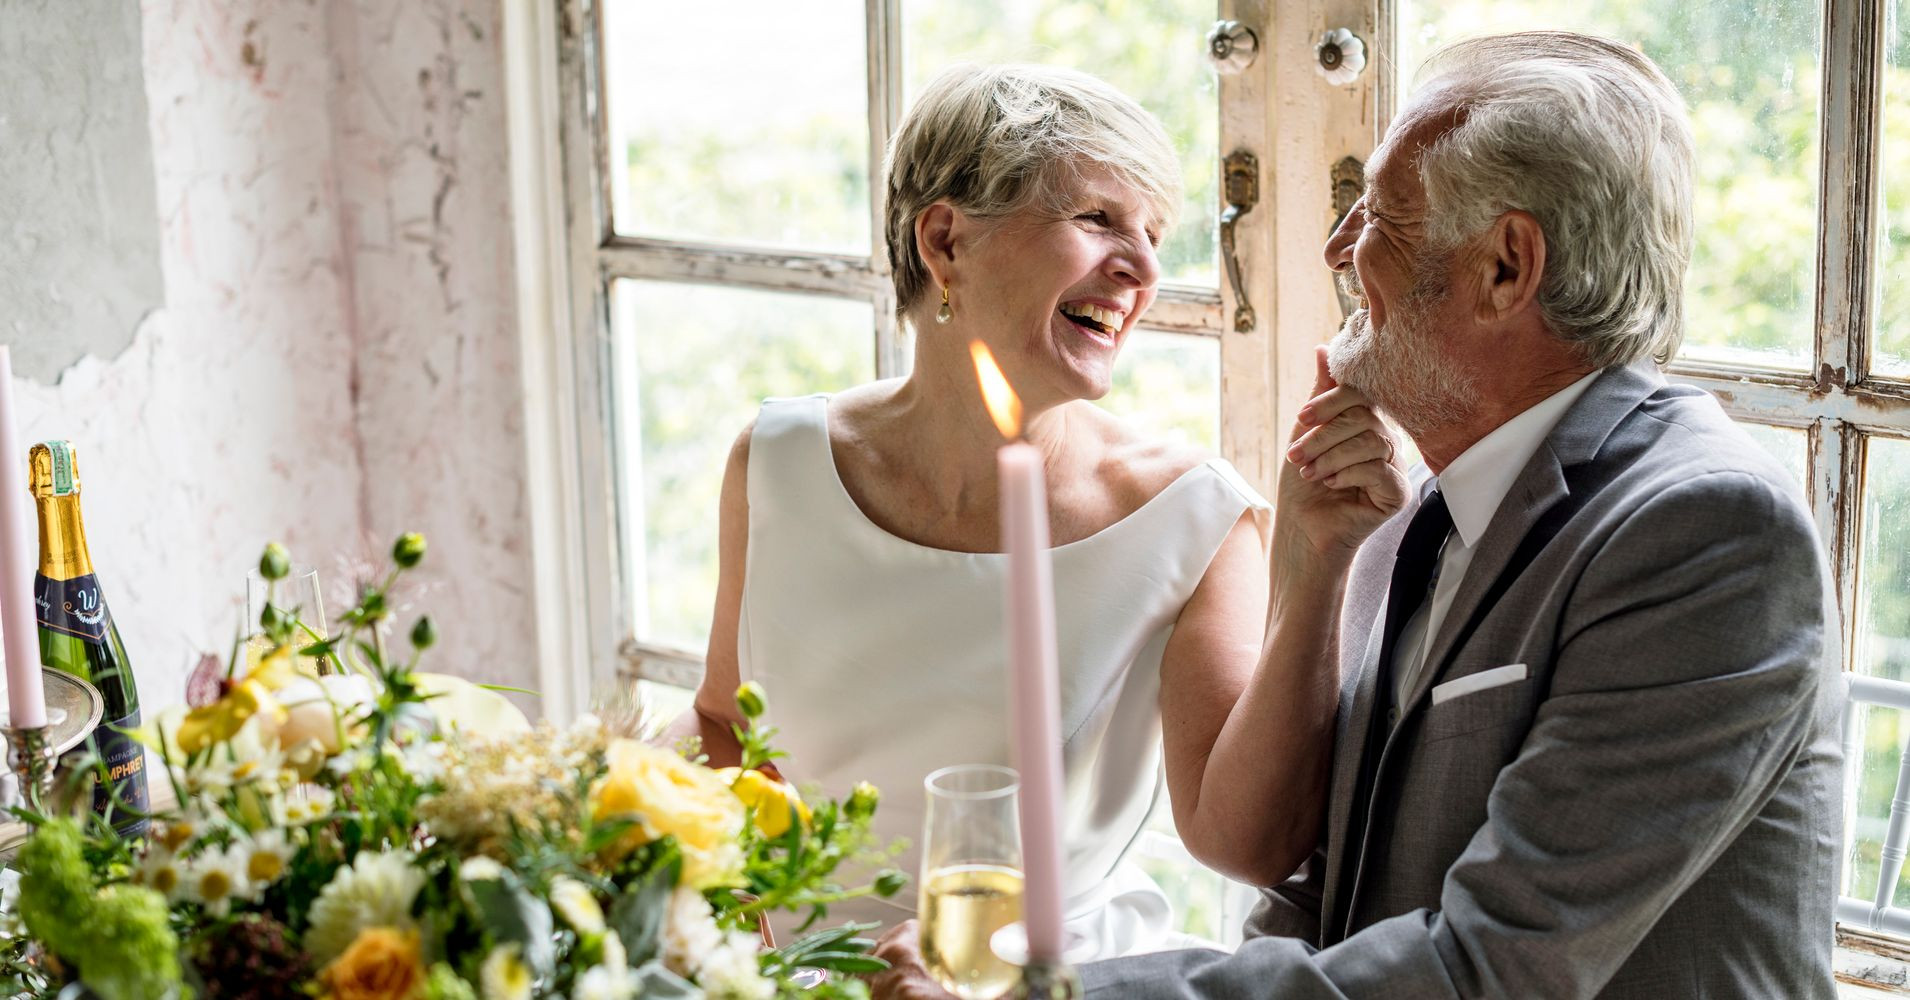 Gift Ideas For Older Couples
 27 Wedding Gifts For Older Couples Marrying The Second